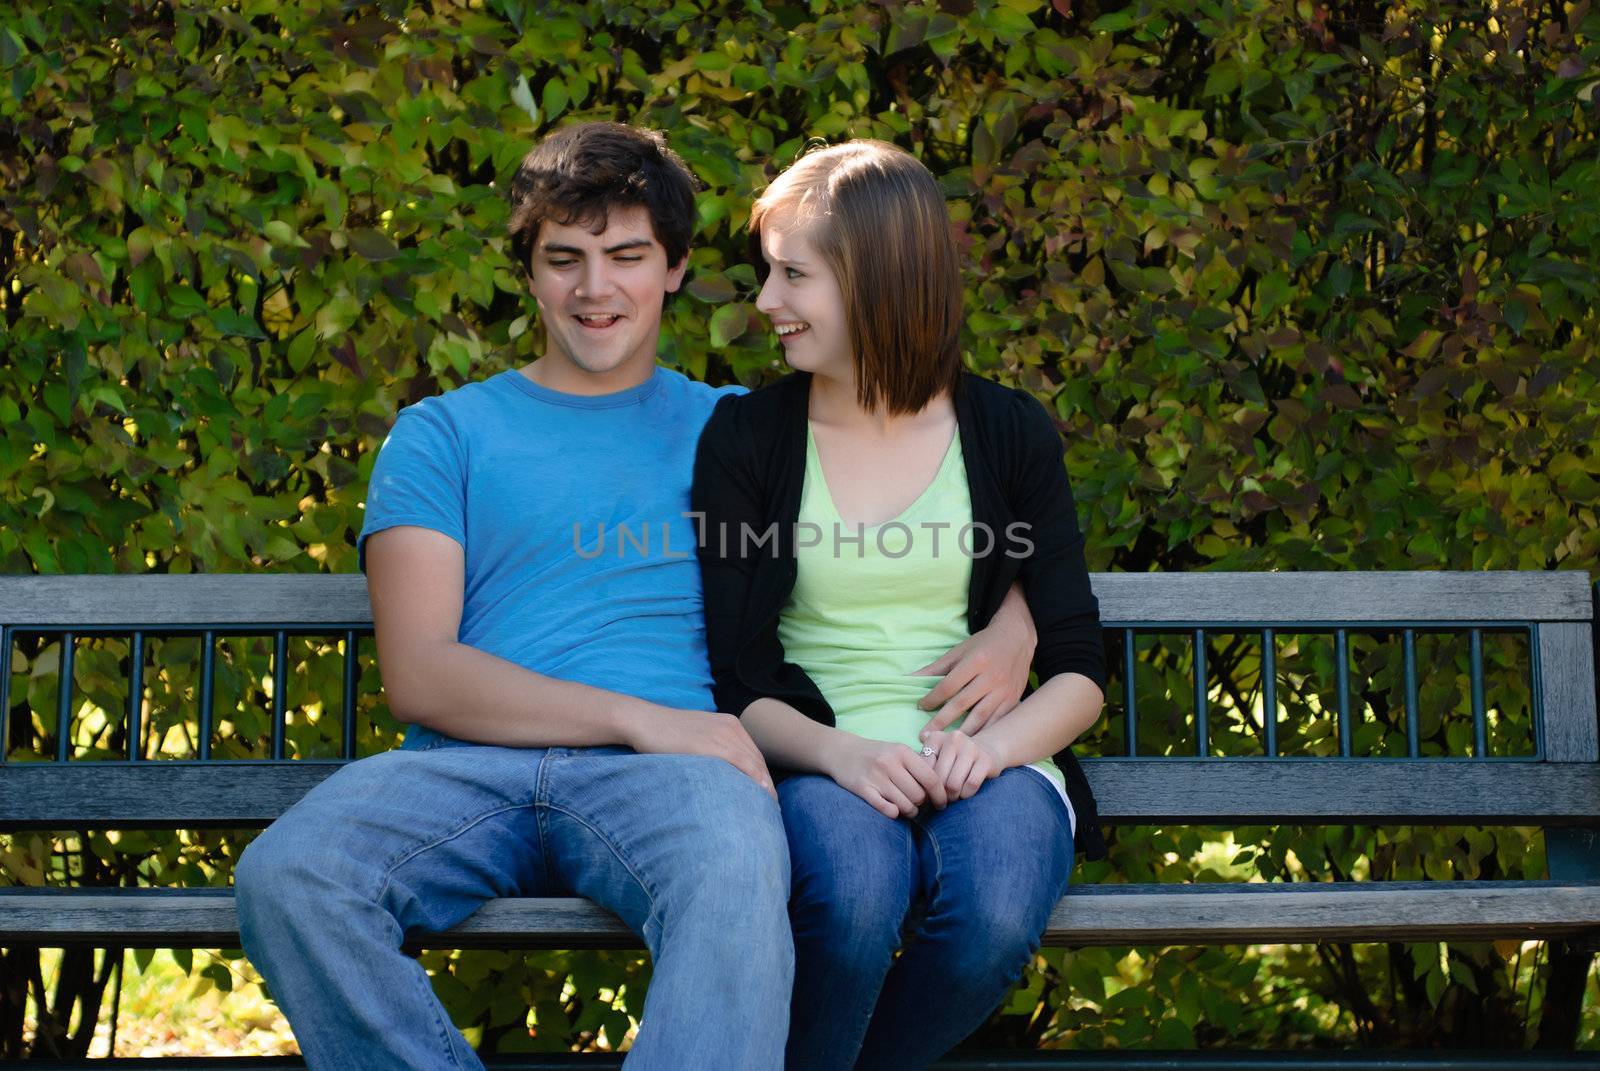 Two teenagers snuggling and sitting on a park bench with leaves in the background.